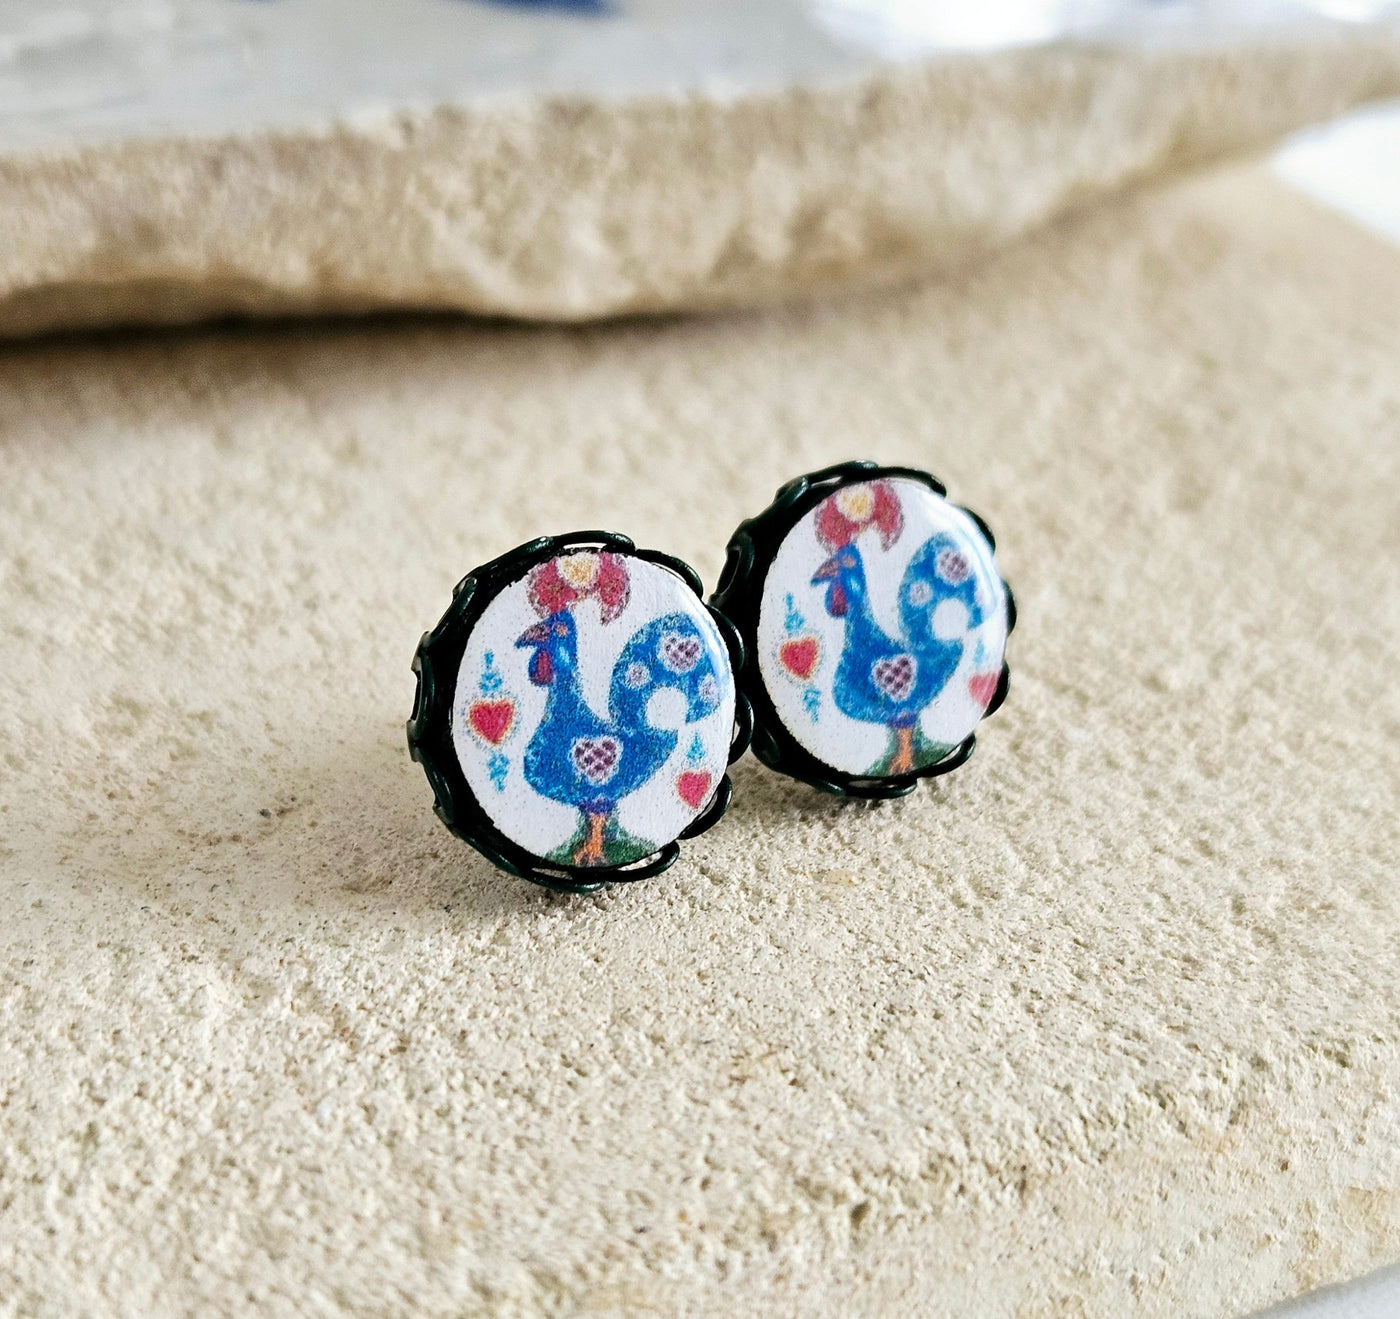 Portugal Rooster Stud Earring Galo Green Earring Portuguese Traditional Small Round Stud Blue Red Earring Europe Travel Rooster Jewelry Gift